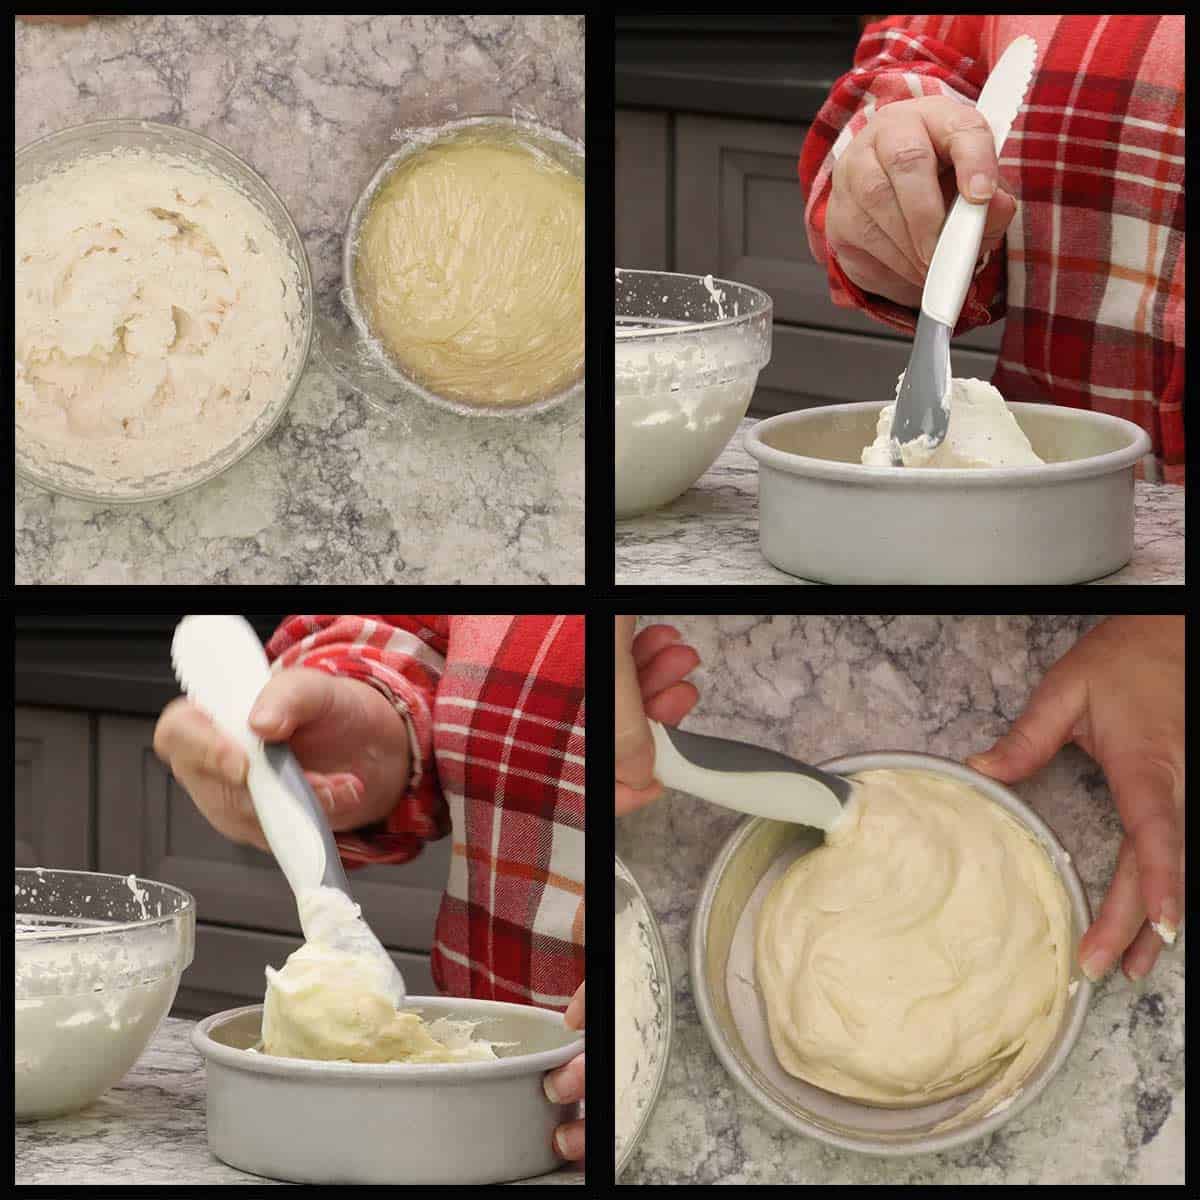 Mixing the whipped cream in with the pastry cream.